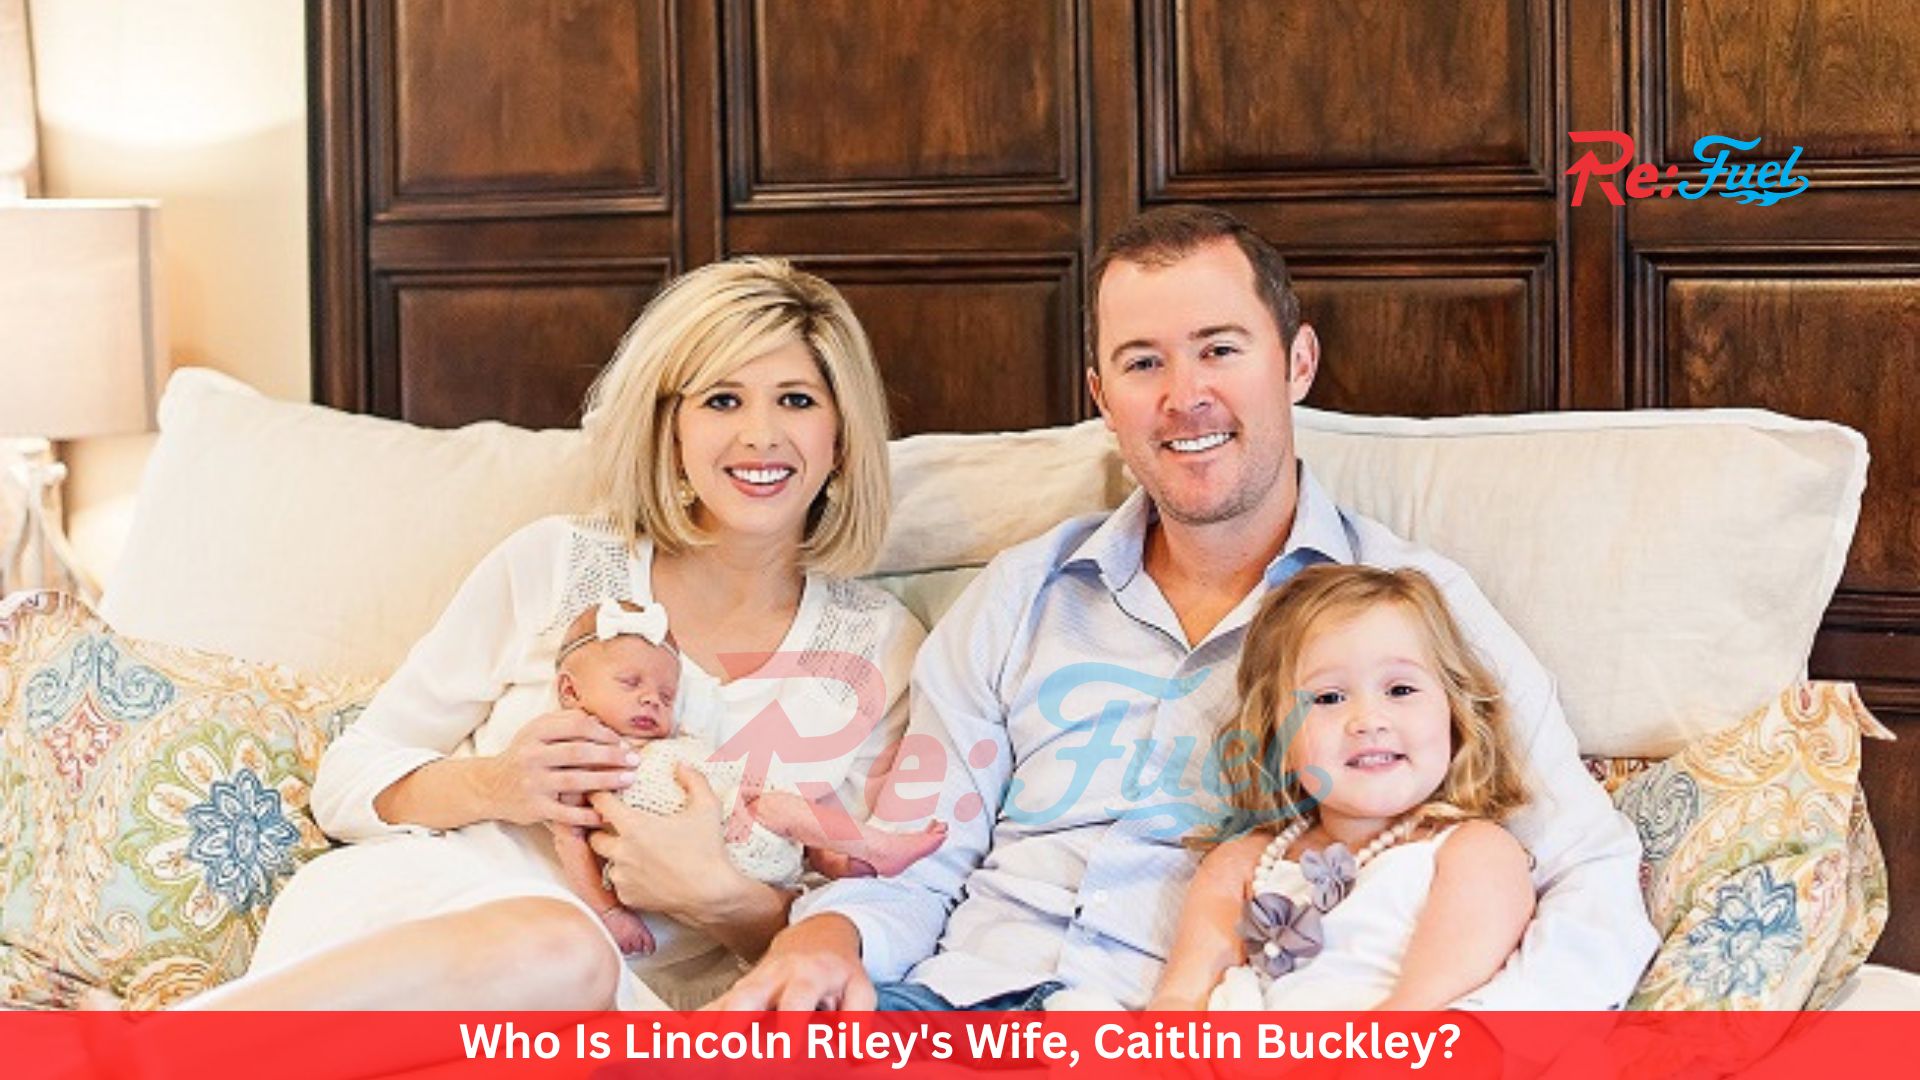 Who Is Lincoln Riley’s Wife, Caitlin Buckley? Benny Dillon 12/03/2022 zero comment Who Is Lincoln Riley's Wife, Caitlin Buckley? The No. 4-ranked Trojans’ crowning moment was supposed to be Friday night’s Pac-12 championship game at Allegiant Stadium. Even Though the team may have lost the football game, Coach Riley and quarterback William are the talk of the town after the Pac-12 championship game. Lincoln Michael Riley is the head coach of the USC Trojans football team at the University of Southern California. He played college football in the United States. People want to know about coach Riley’s personal life. In this article, we’ll talk about Riley’s personal life and his wife. Who Is Lincoln’s Wife? Caitlin Buckley is the name of Lincoln Riley’s wife. She is a housewife whose name is well-known because her husband is a famous person. Caitlin Elyse Buckley was born in Dimmitt, Texas, United States, on September 5, 1983. As of 2022, she will be 39 years old. Caitlin played basketball and ran track and cross country in high school. Her grandfather was a well-known basketball coach. But when she went to college, she changed her mind about becoming a sportswoman. Who Is Lincoln Riley's Wife, Caitlin Buckley? Also Read: Who Is Son Heung Min’s Girlfriend? Is He Currently Dating Anyone? Caitlin went to Texas Tech University in Lubbock, Texas, after she graduated from high school at the age of 16. Texas Tech is a public research university. Caitlin Buckley worked as a nanny for three years and then became a kindergarten teacher. When Did Lincoln Riley And Caitlin Buckley First Meet And Start Dating? When Caitlin Buckley was in high school, she met Lincoln Riley. In 2002, when Lincoln was a freshman at Texas Tech University and Caitlin was a senior at Dimmitt High School, they started going out. Also, on their first date, they went to Olive Garden for dinner and watched the movie, Sweet Home. Caitlin got married to Lincoln Riley on July 14, 2007, about a year after she graduated from college. Their wedding took place in Marble Falls, Texas, at the First Methodist Church. Then, for their honeymoon, they flew to Maui, Hawaii. Caitlin Buckley and Lincoln Riley had their first child, Sloan Riley, in December 2012. This was five years after they got married. Then, in 2016, they had a second daughter named Stella Riley. She was born before his dad started working as Oklahoma’s head coach. Because he works in a lot of different places, Lincoln Riley’s family has moved around a lot. In Oklahoma, Caitlin had two homes in the town of Norman. Also Read: Who Is Caleb Williams’s Girlfriend? Is He Dating Valery Orellana? Riley’s Instagram page, which has a lot of family photos, often shows pictures of her children. Lincoln’s Instagram page shows a family that loves to go fishing, swimming, and horseback riding, among other outdoor activities. Riley has said that one reason he left Oklahoma for USC was so that he could give his family new experiences. Lincoln told us: “It is very, very important to me and my wife to try new things in this life. We aren’t afraid to take chances. I don’t see this as a risk, but we’re not afraid to jump, and this was the right time and everything made sense.” Who Is Lincoln Riley's Wife, Caitlin Buckley? Since March of 2022, when Caitlin’s husband spent $17.2 million on a mansion in Palos Verdes Estates with a view of the ocean, Lincoln Riley and her family have made Los Angeles, California, their permanent home. Her three-acre property features a mansion that is 13,000 square feet in size, with seven bedrooms and twelve bathrooms.